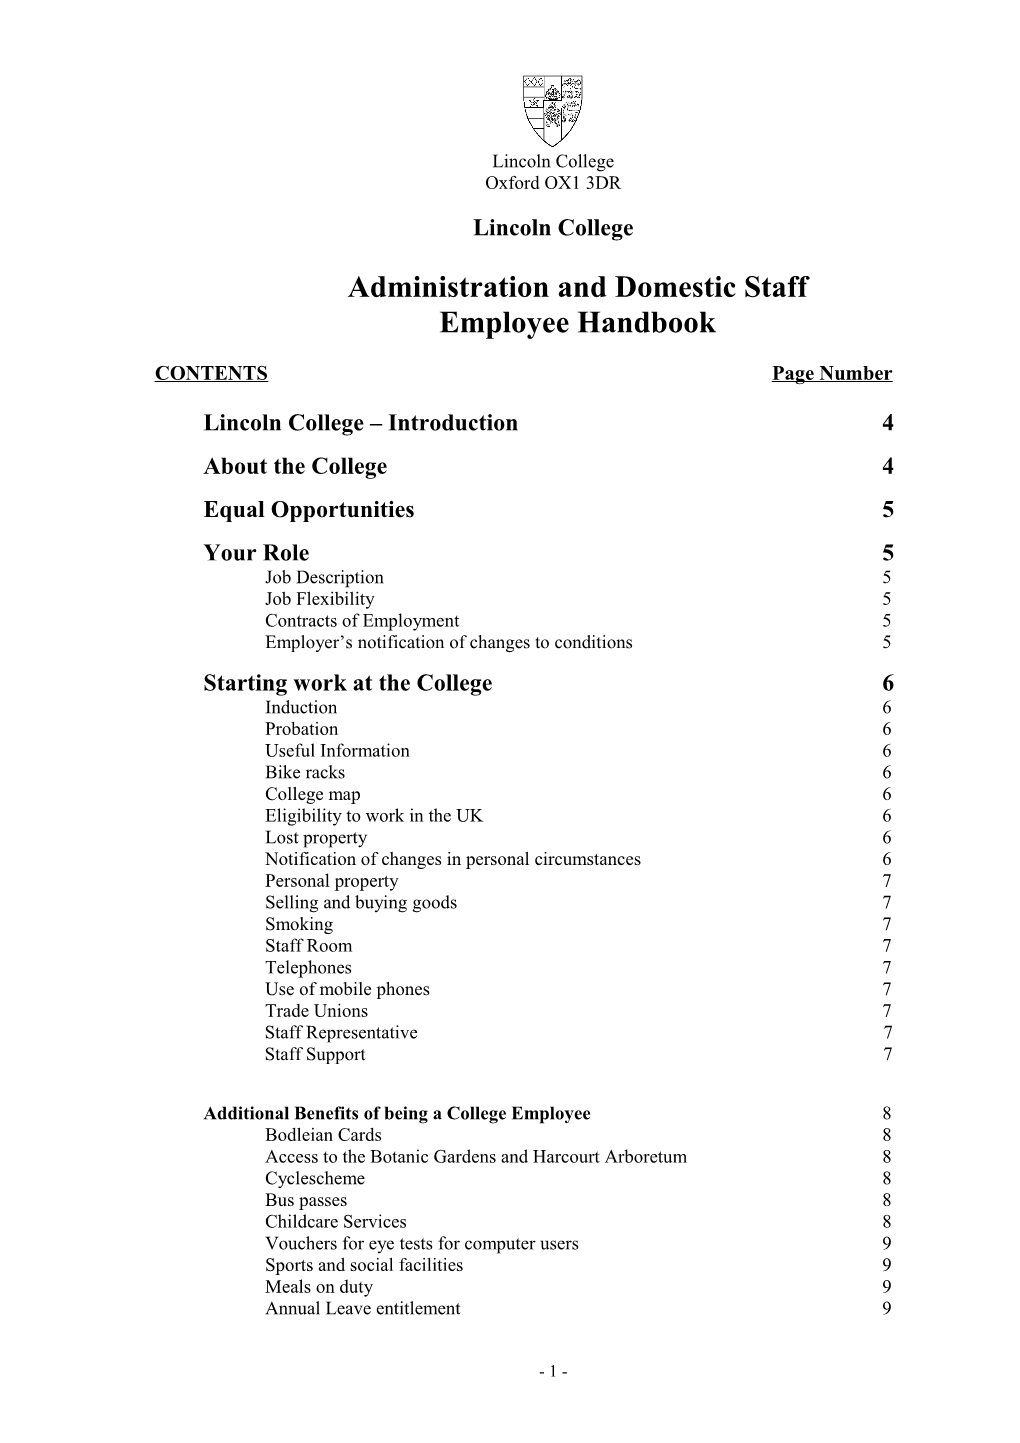 Administration and Domestic Staff